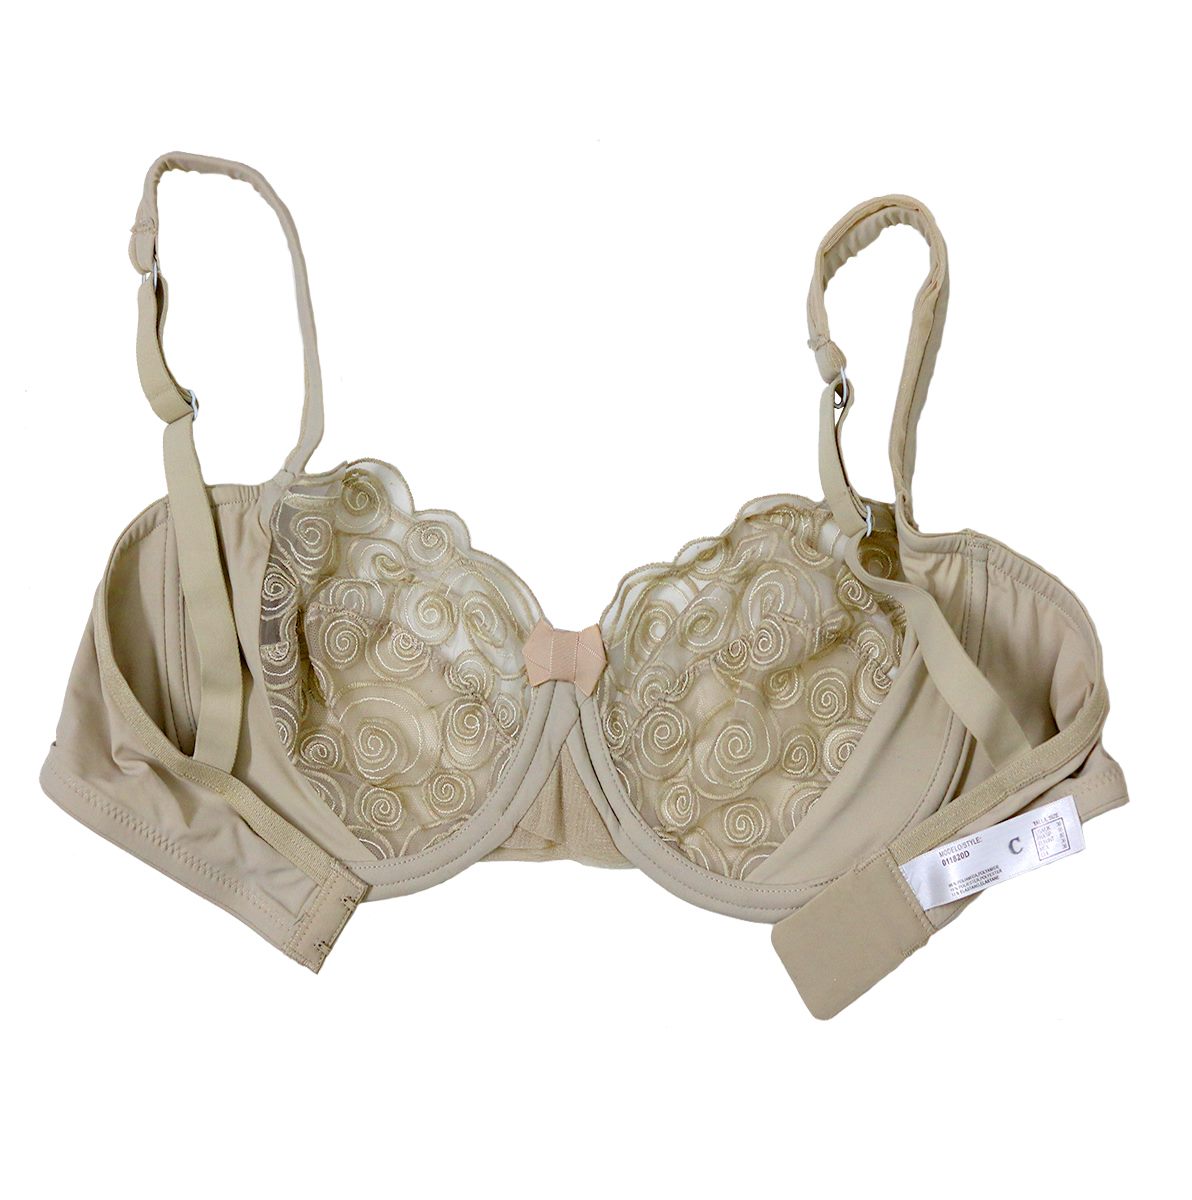 Leonisa Lace Non-Padded Wired & Demi Coverage Bra Panty Set